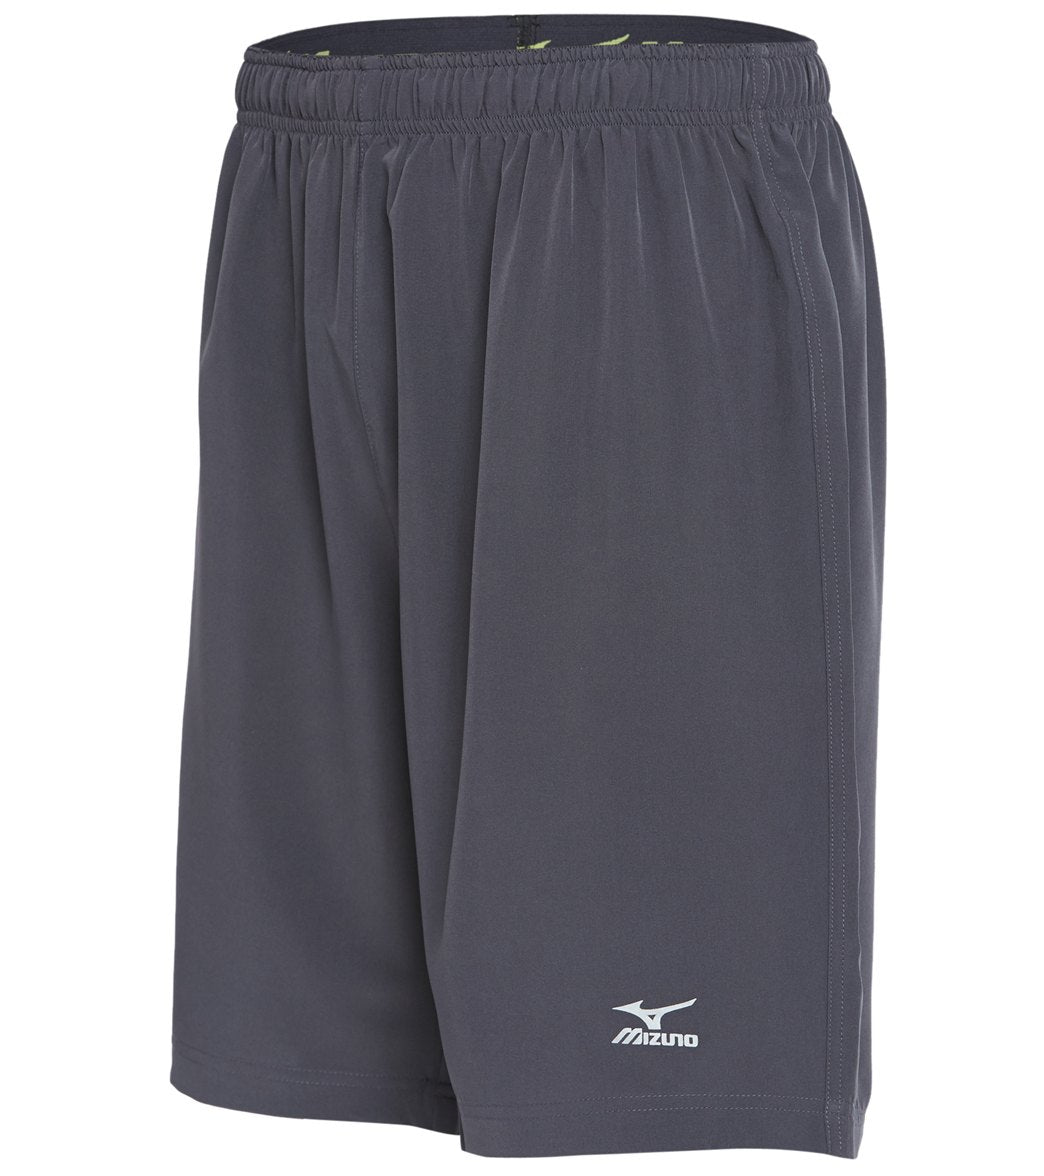 Mizuno Men's Euro Cut Volleyball Short - Charcoal Large Polyester/Spandex - Swimoutlet.com